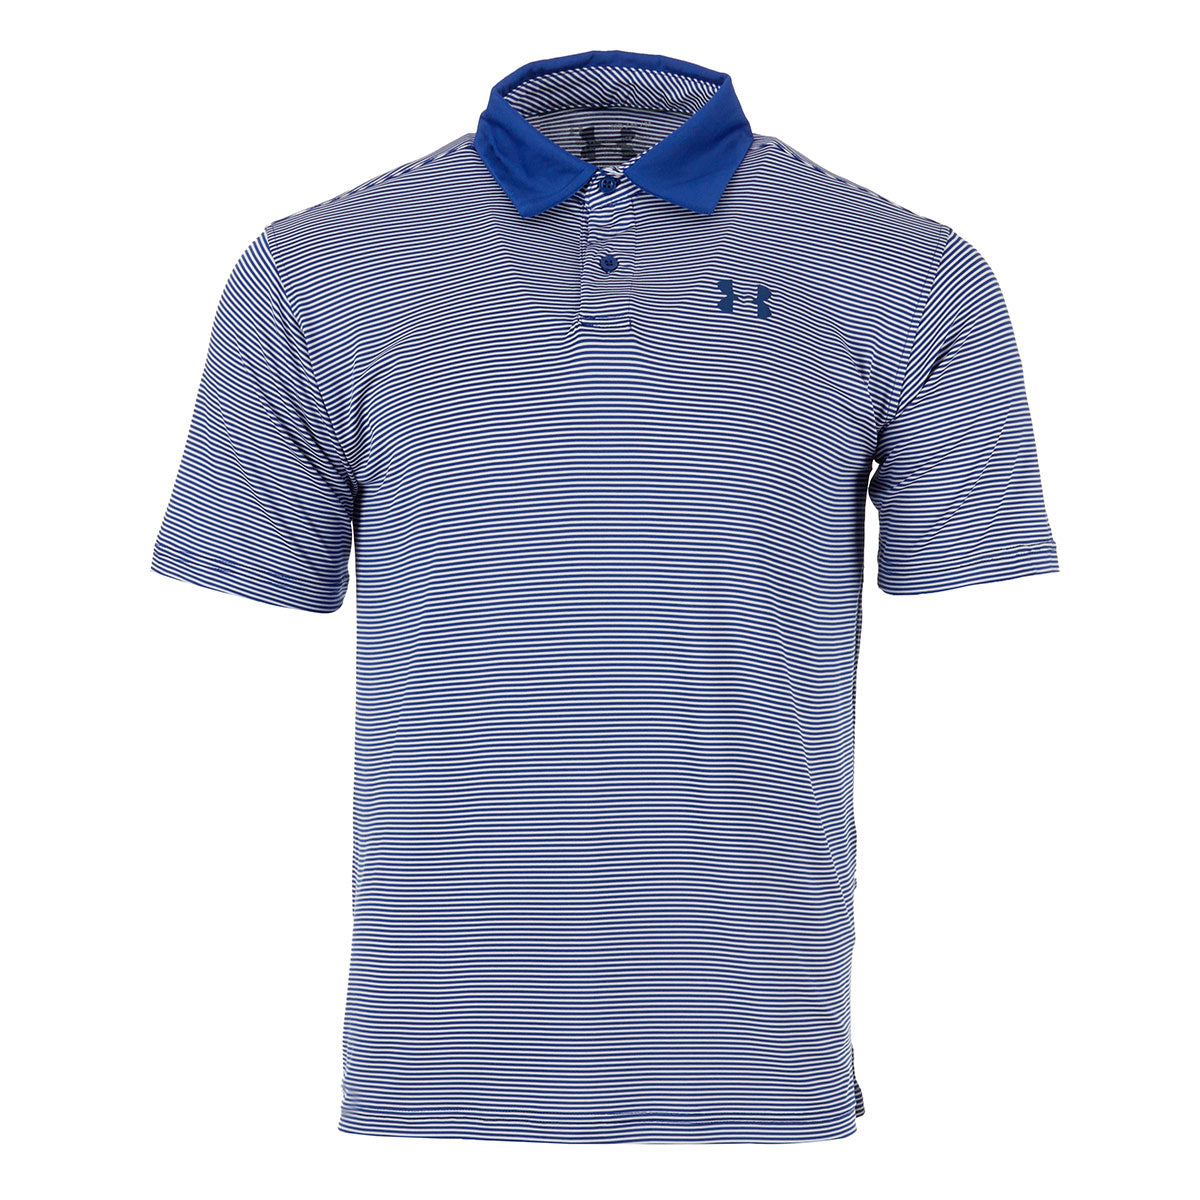 Image of Under Armour Men's Performance Stripe Polo